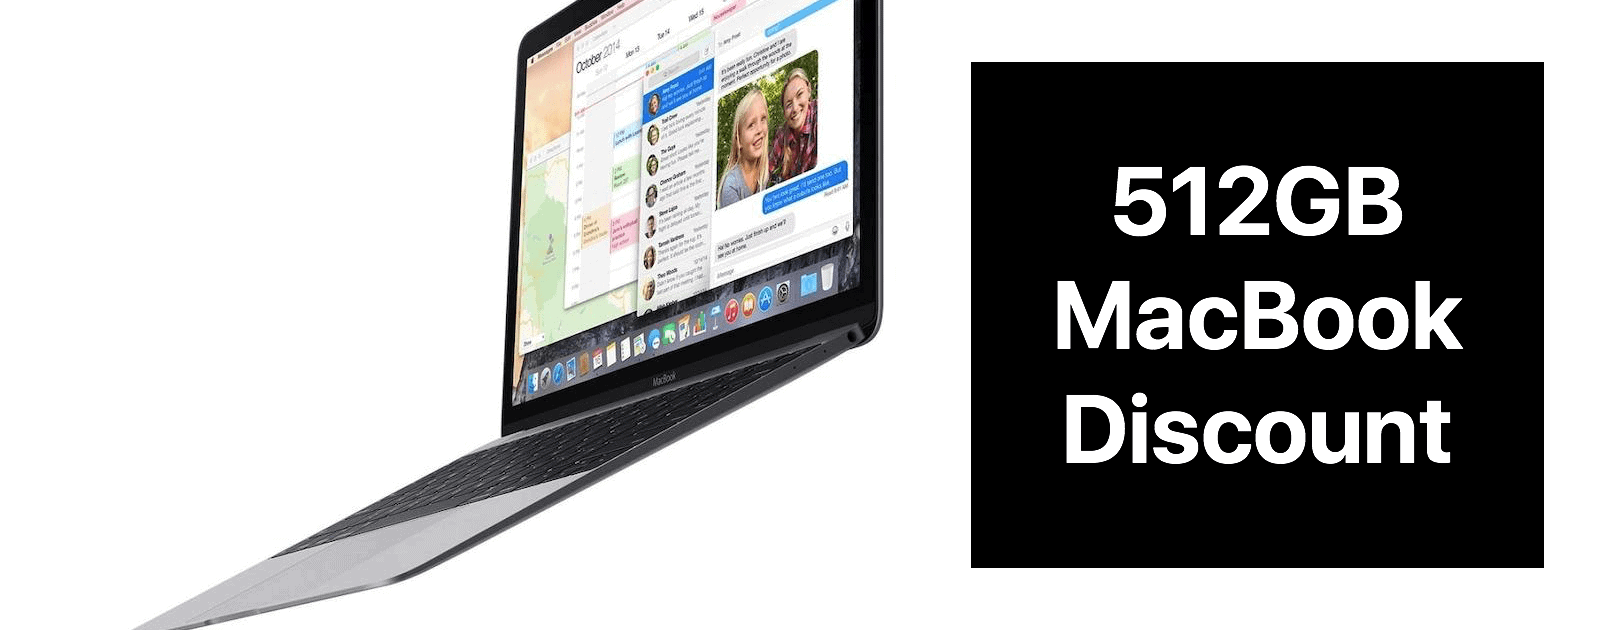 Today Only: 512GB MacBook Discounted to $1000